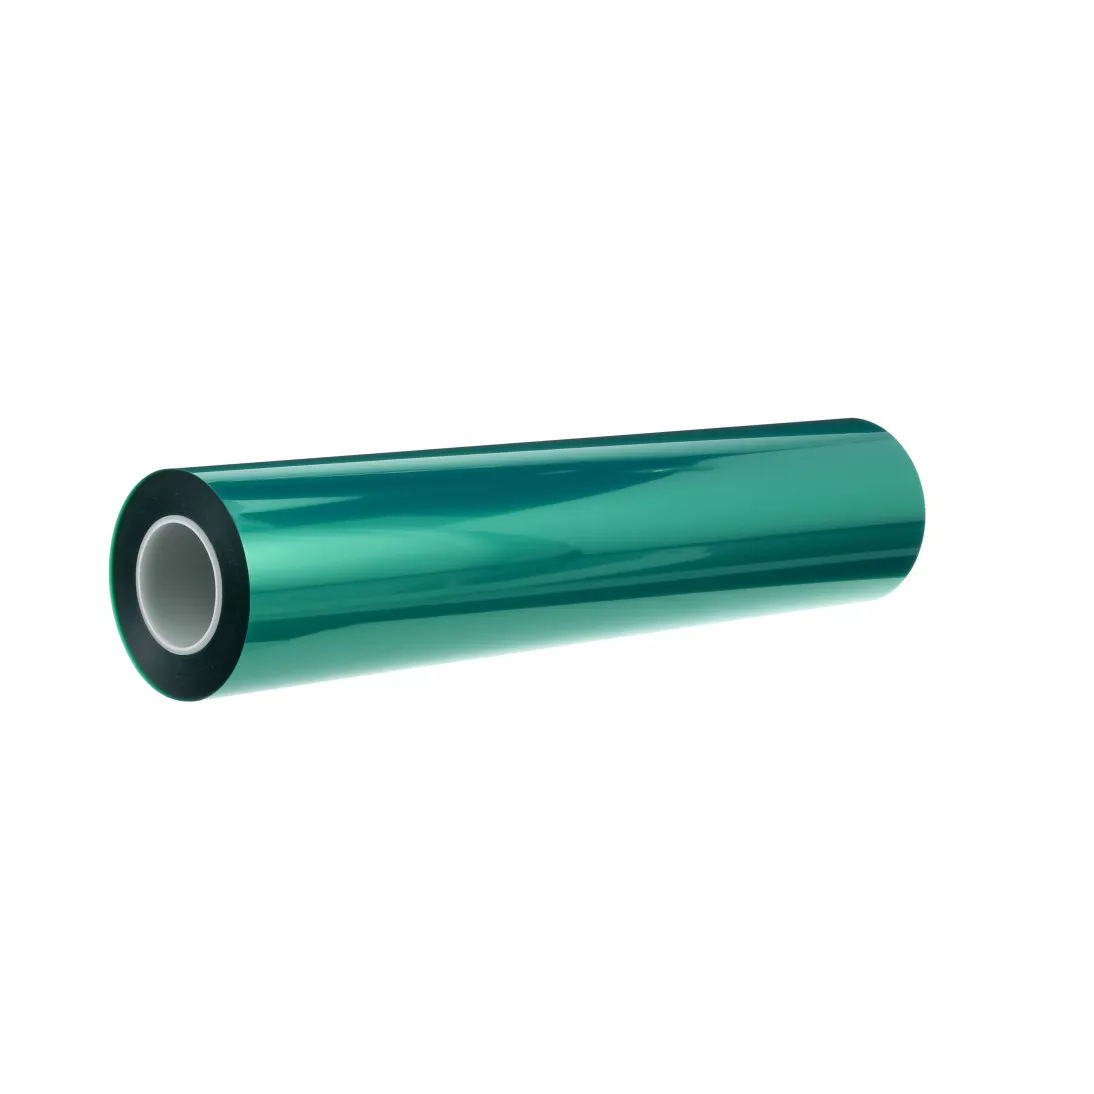 3M™ Polyester Tape 8992, Green, 50.4 in x 500 yd, 3.2 mil, 1 roll per
case